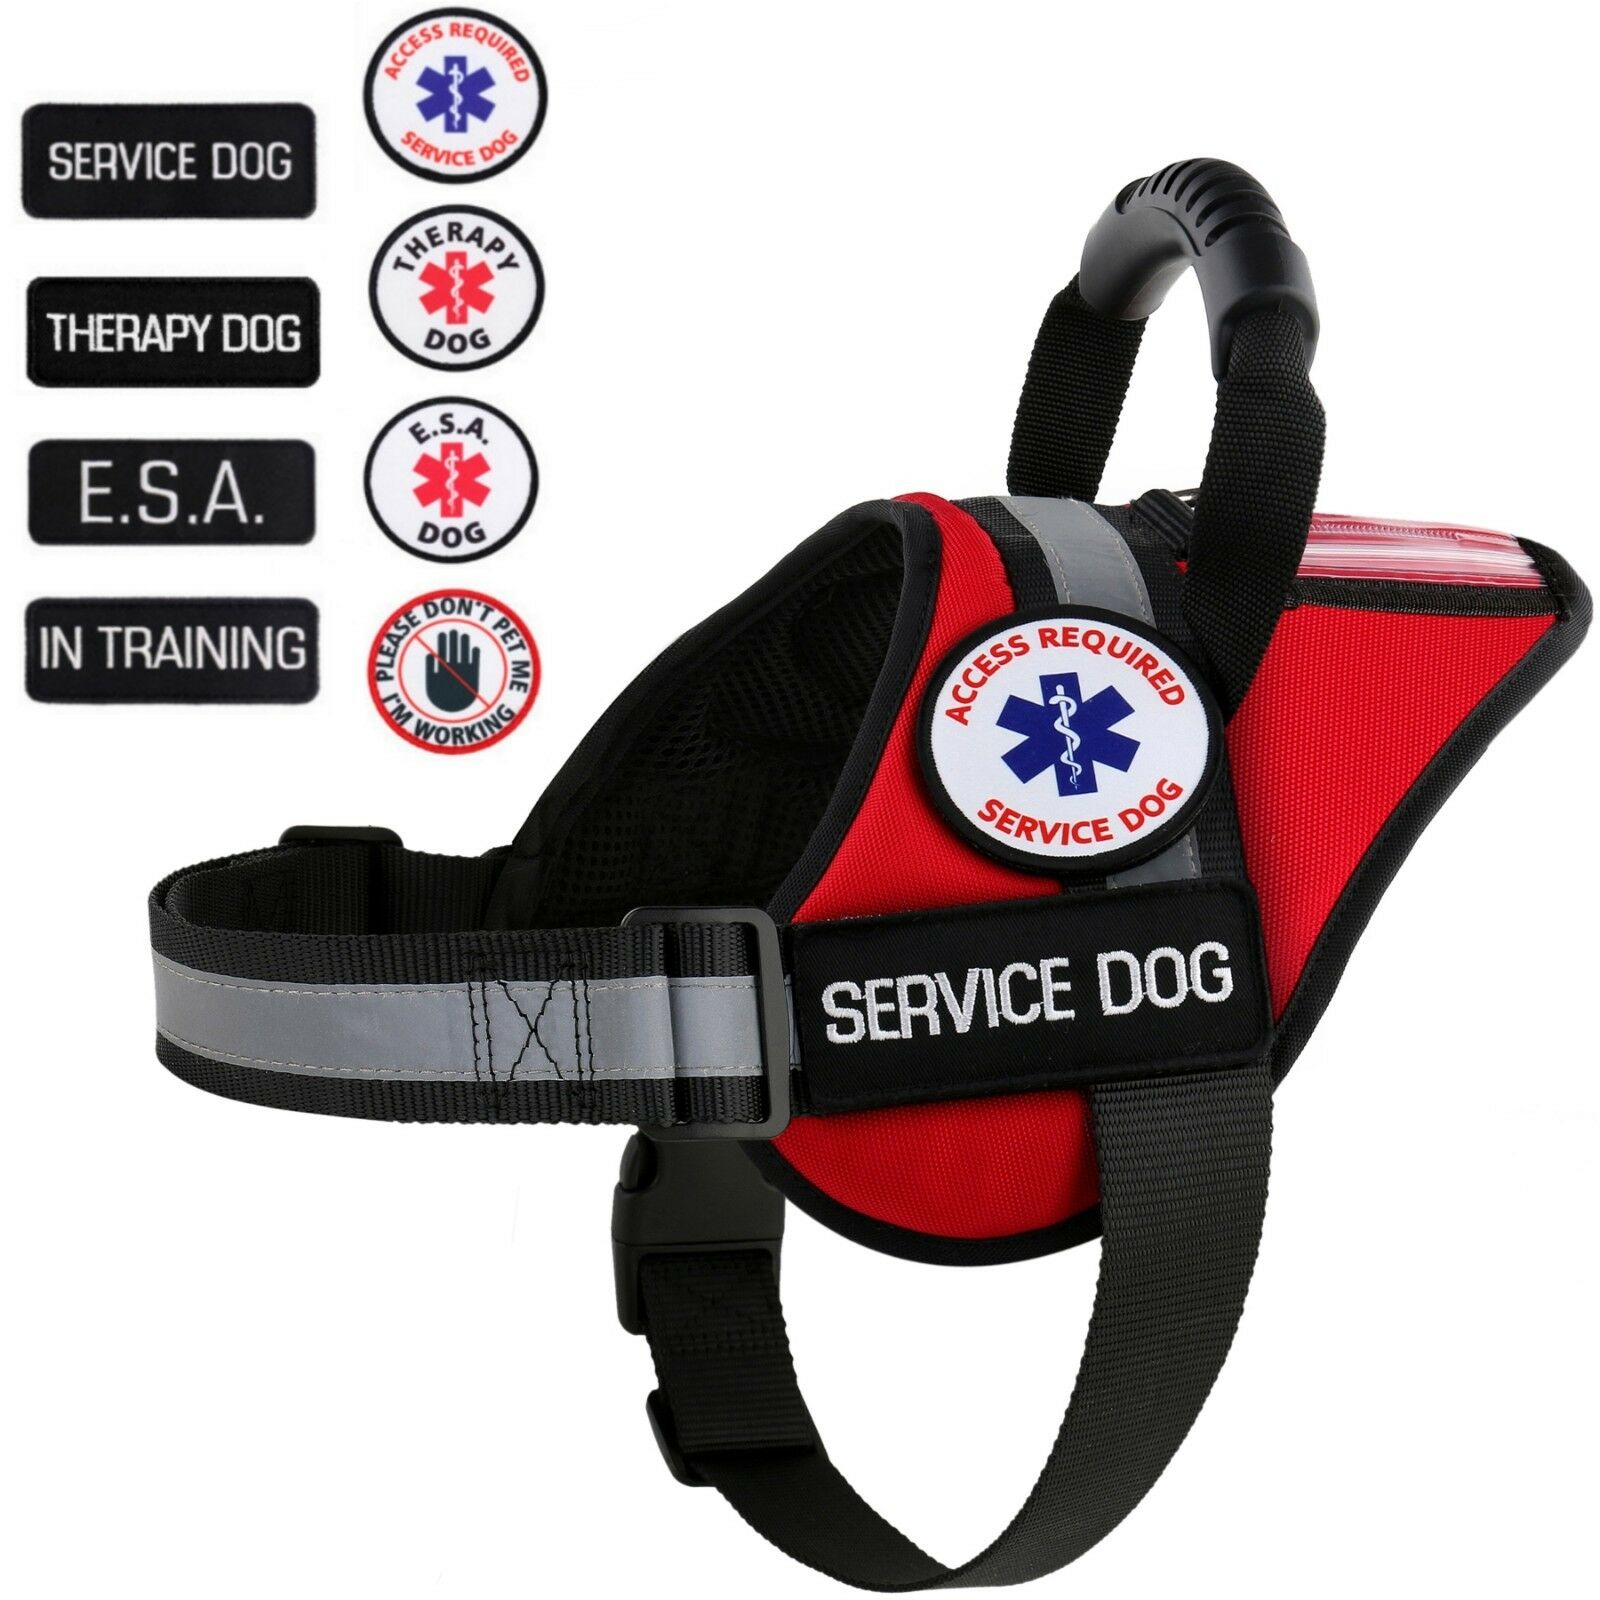 Service Dog - Esa Dog - Therapy Dog - Harness Vest Waterproof All Access Canine™